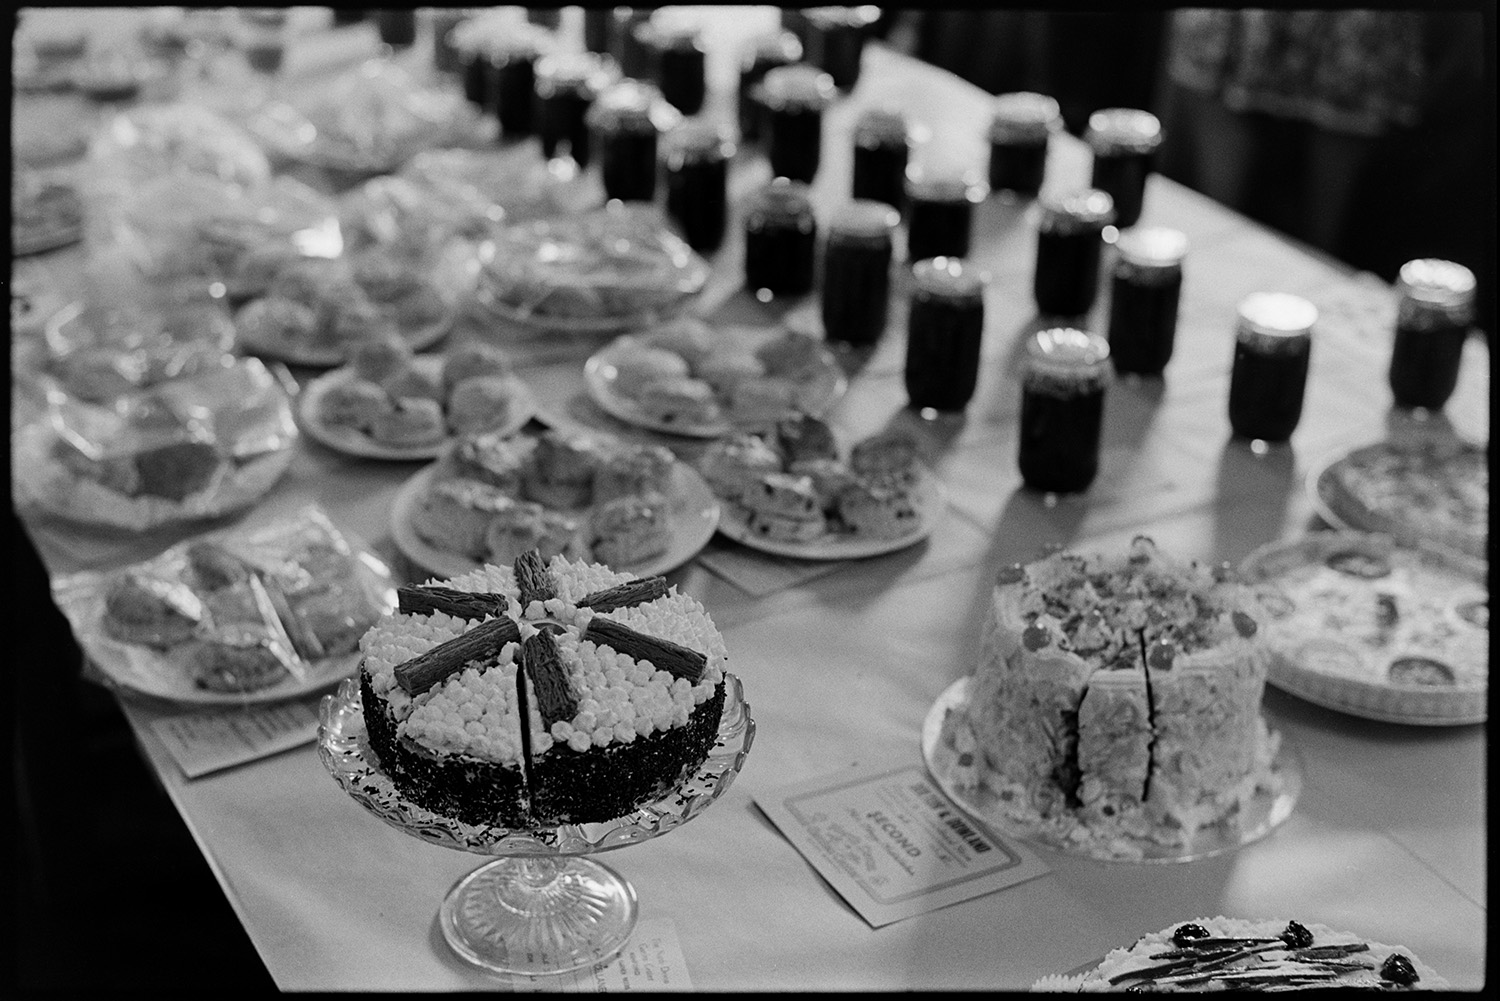 Flower show, people looking at exhibits, women looking at cake, paintings on display.
[A display of cakes, scones, quiches and jams on a table at the Dolton Flower Show in Dolton Village Hall. One of the cakes has been awarded a prize.]